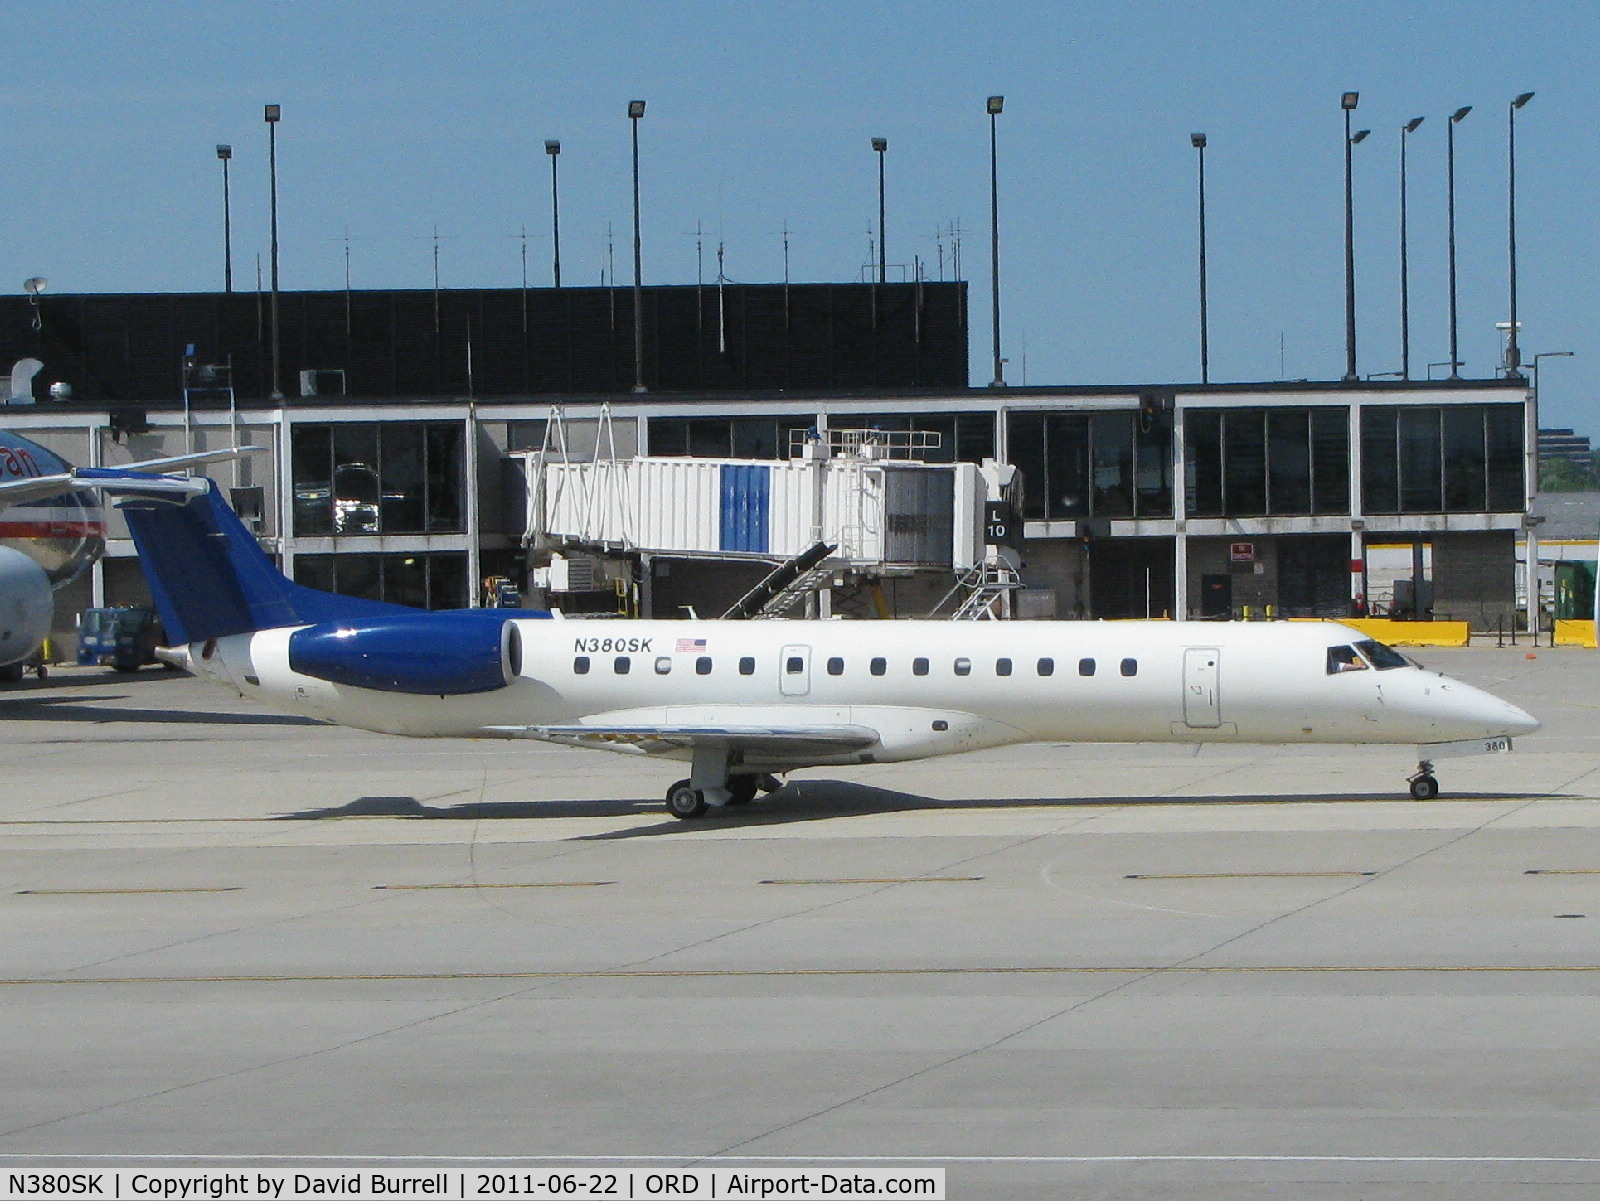 N380SK, 2002 Embraer ERJ-140LR (EMB-135KL) C/N 145613, Chautauqua Airlines Inc Embraer EMB-135KL taxiing at Chicago O'hare Airport.